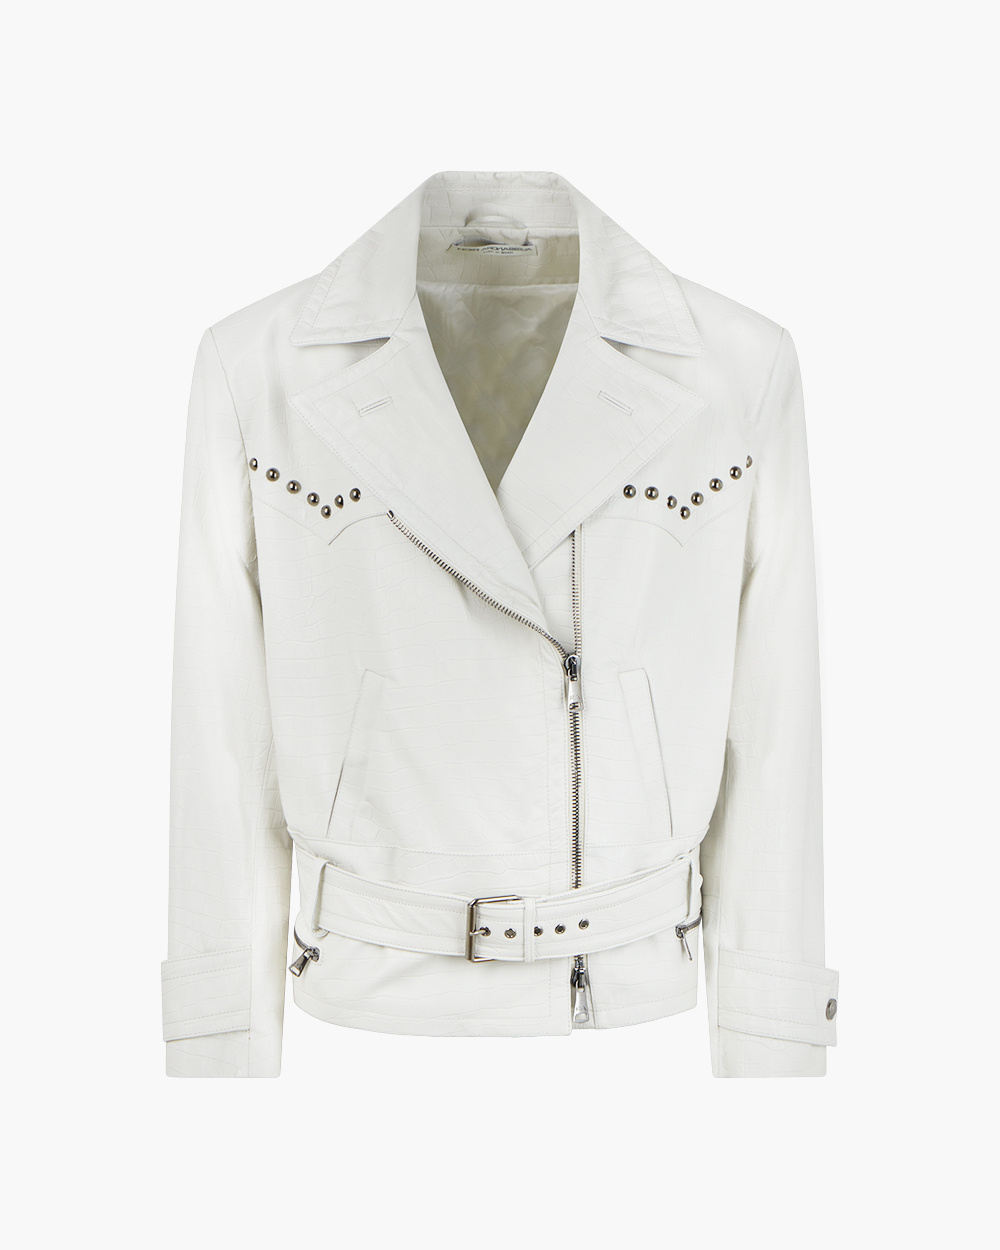 WHITE OVERSIZE BIKER JACKET IN CROCO-PRINT LEATHER WITH STUDS